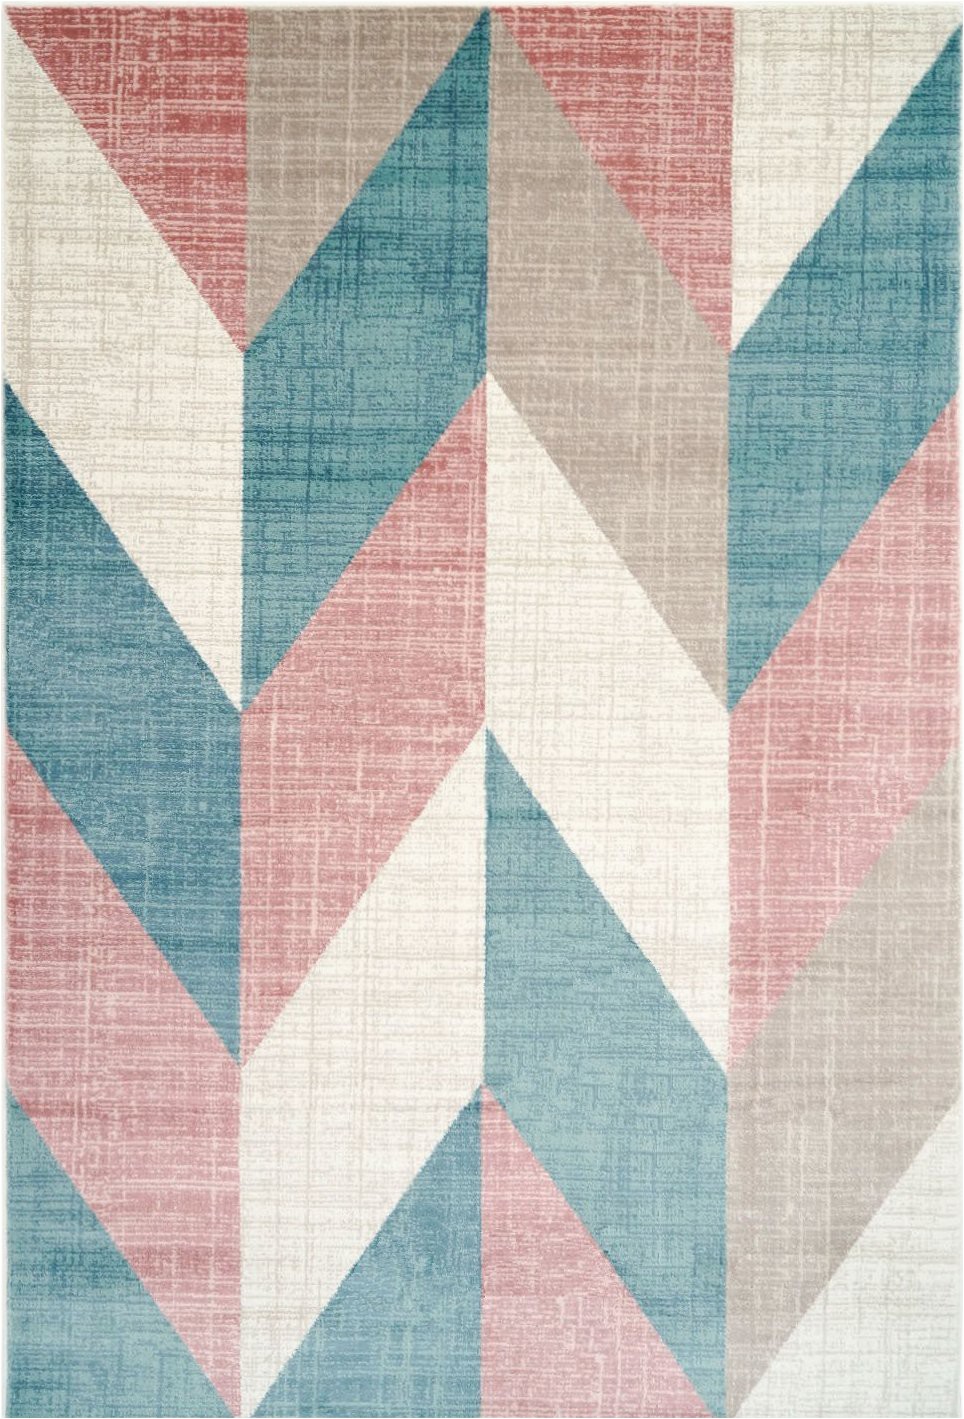 Pink and Turquoise area Rug Ladole Rugs Blue Pink Turquoise Indoor Modern area Rug Mat Carpet Runner for Living Bed Room Entry Way Patio Small Medium Non Slip Skid Size